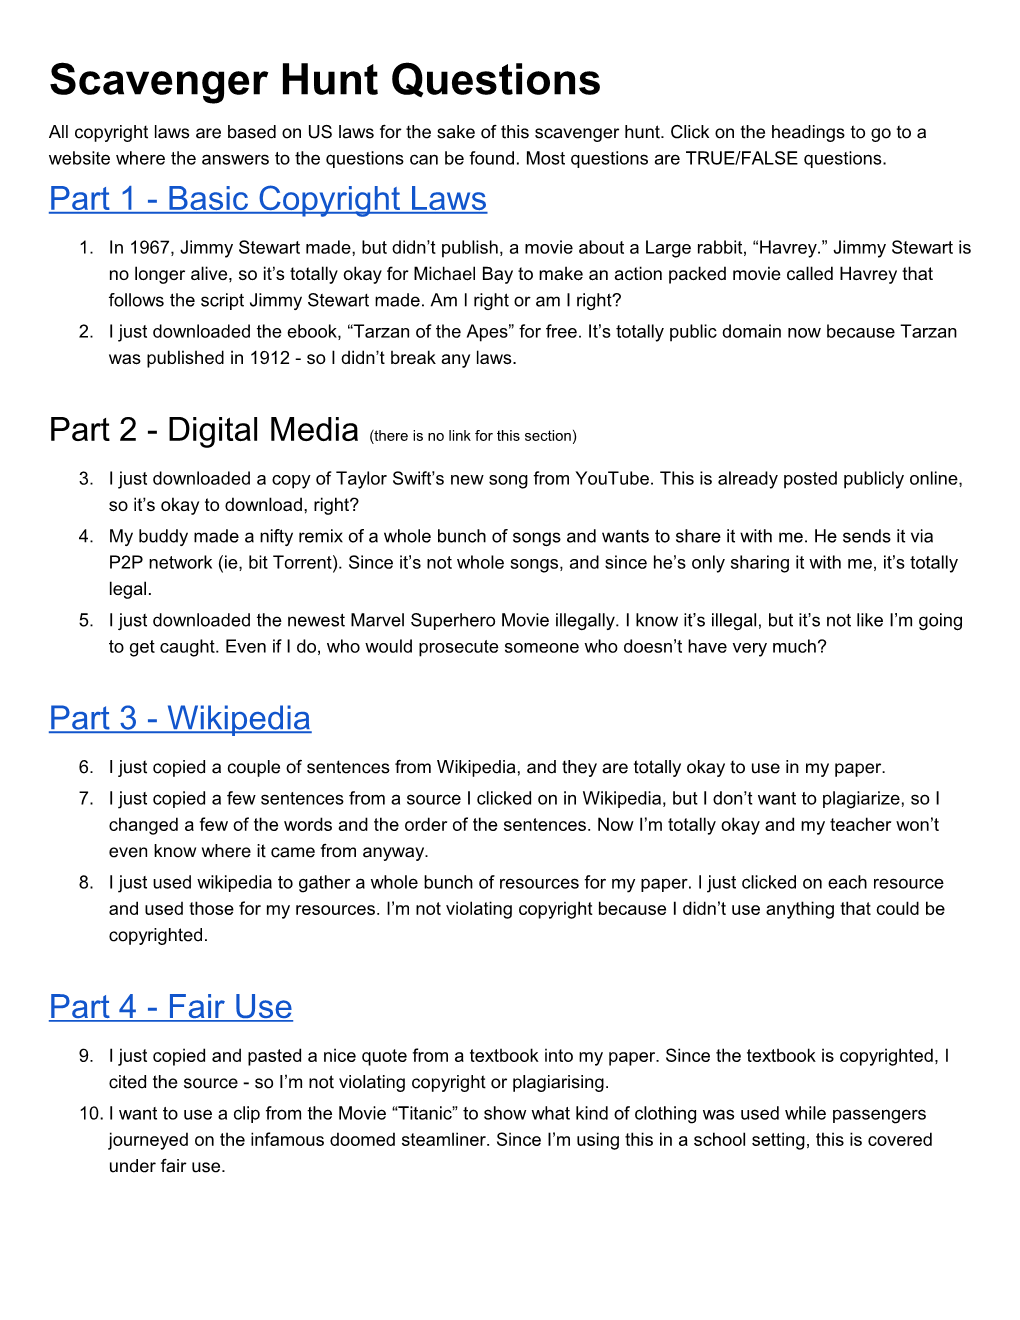 Part 2 - Digital Media (There Is No Link for This Section)